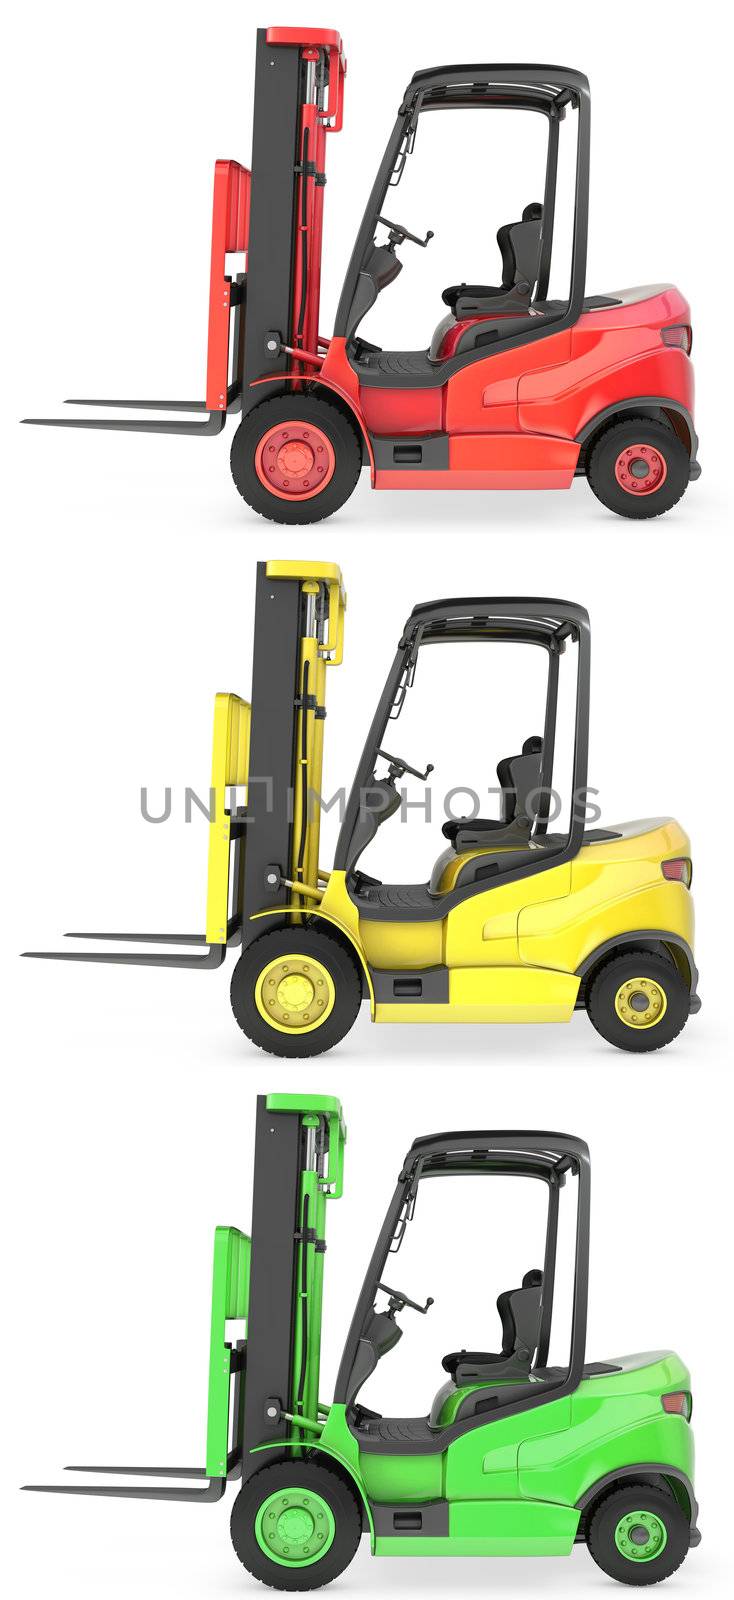 Three fork lift trucks colored as traffic lights, isolated on white background